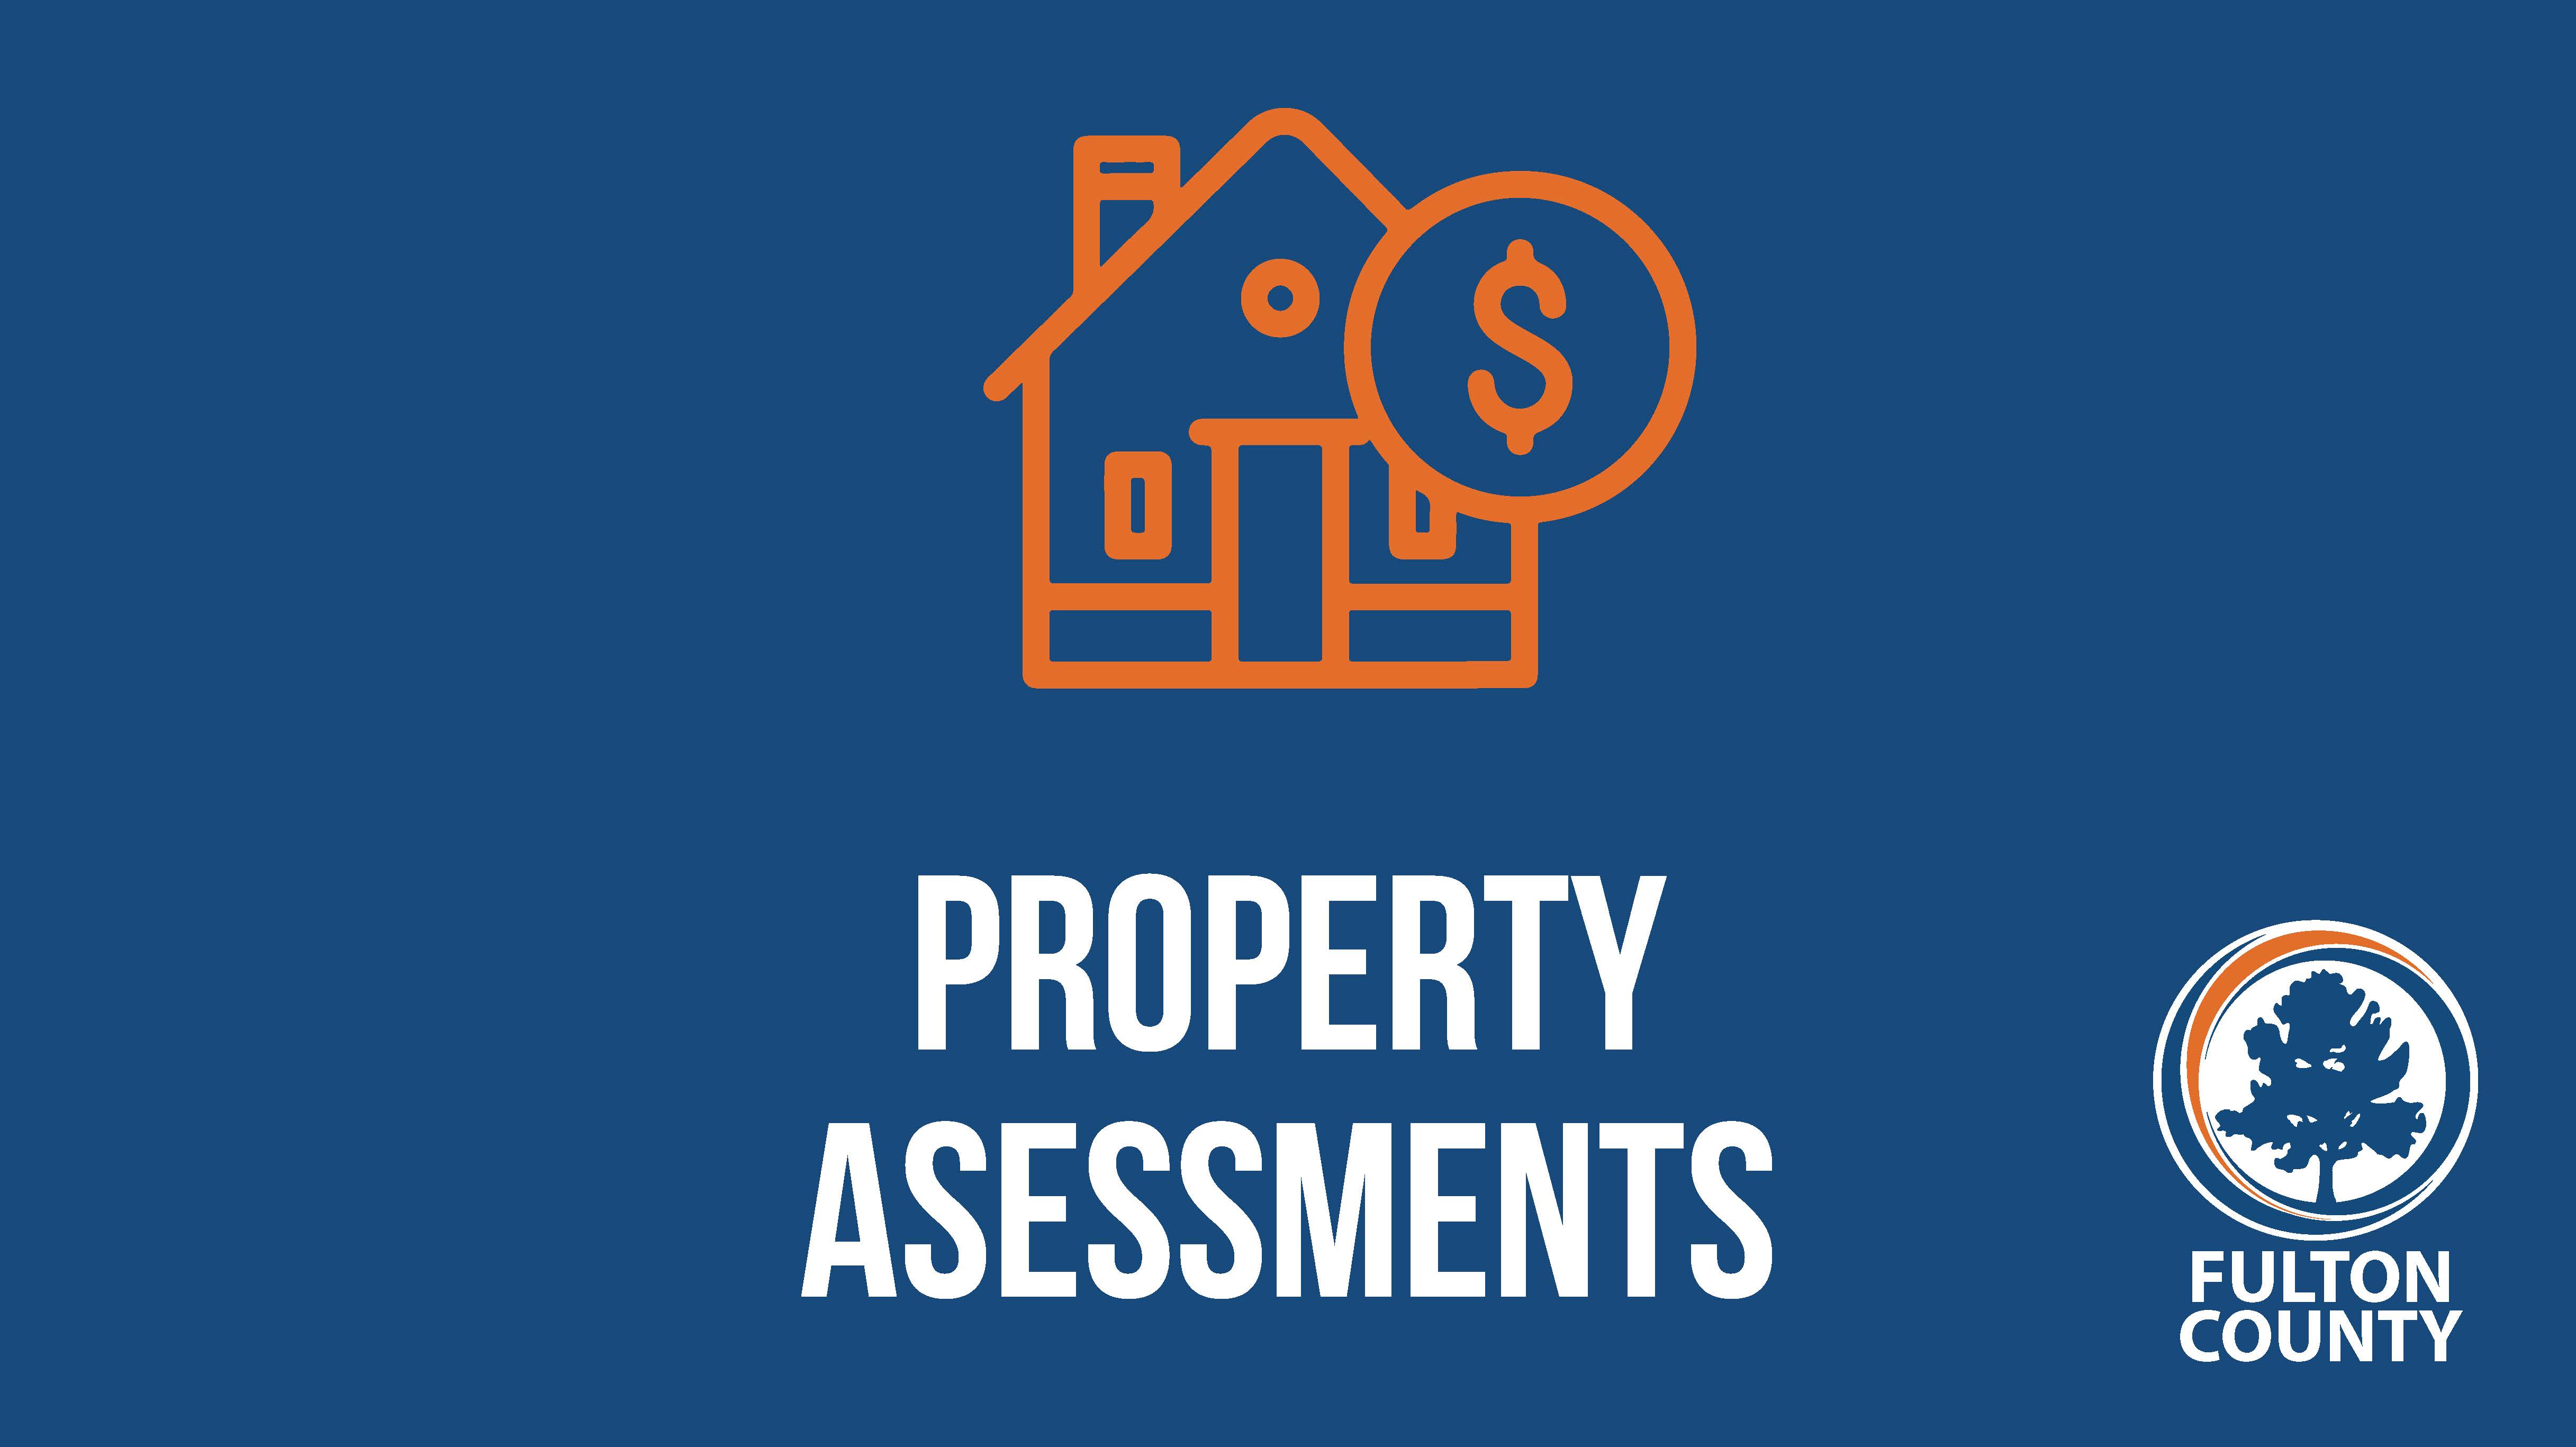 Property Assessments house icon